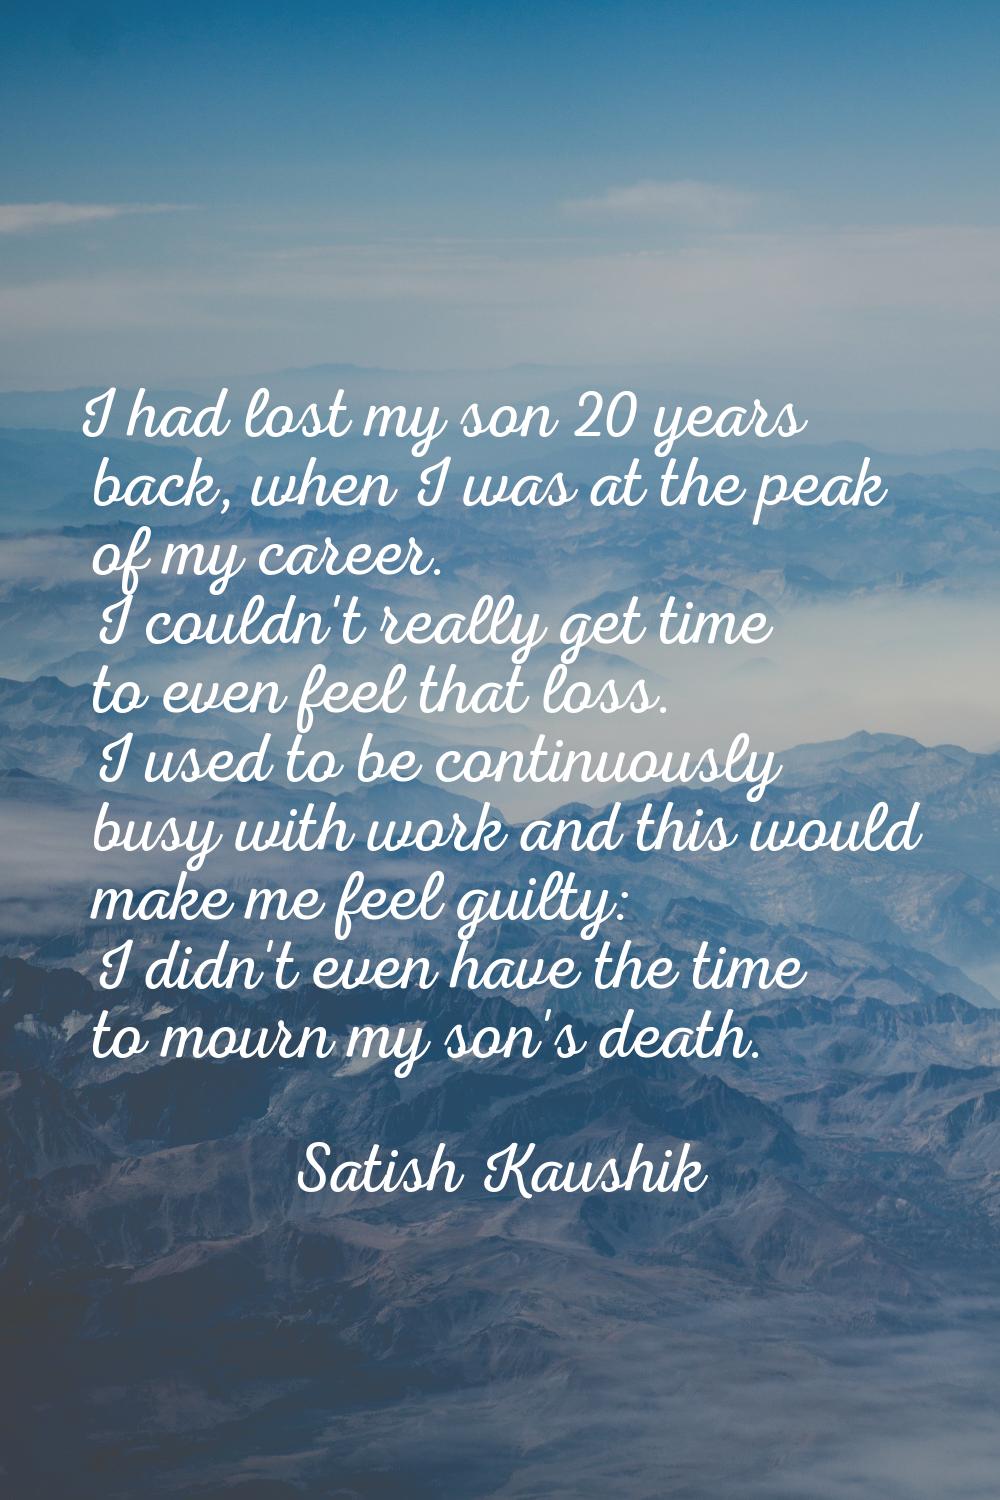 I had lost my son 20 years back, when I was at the peak of my career. I couldn't really get time to